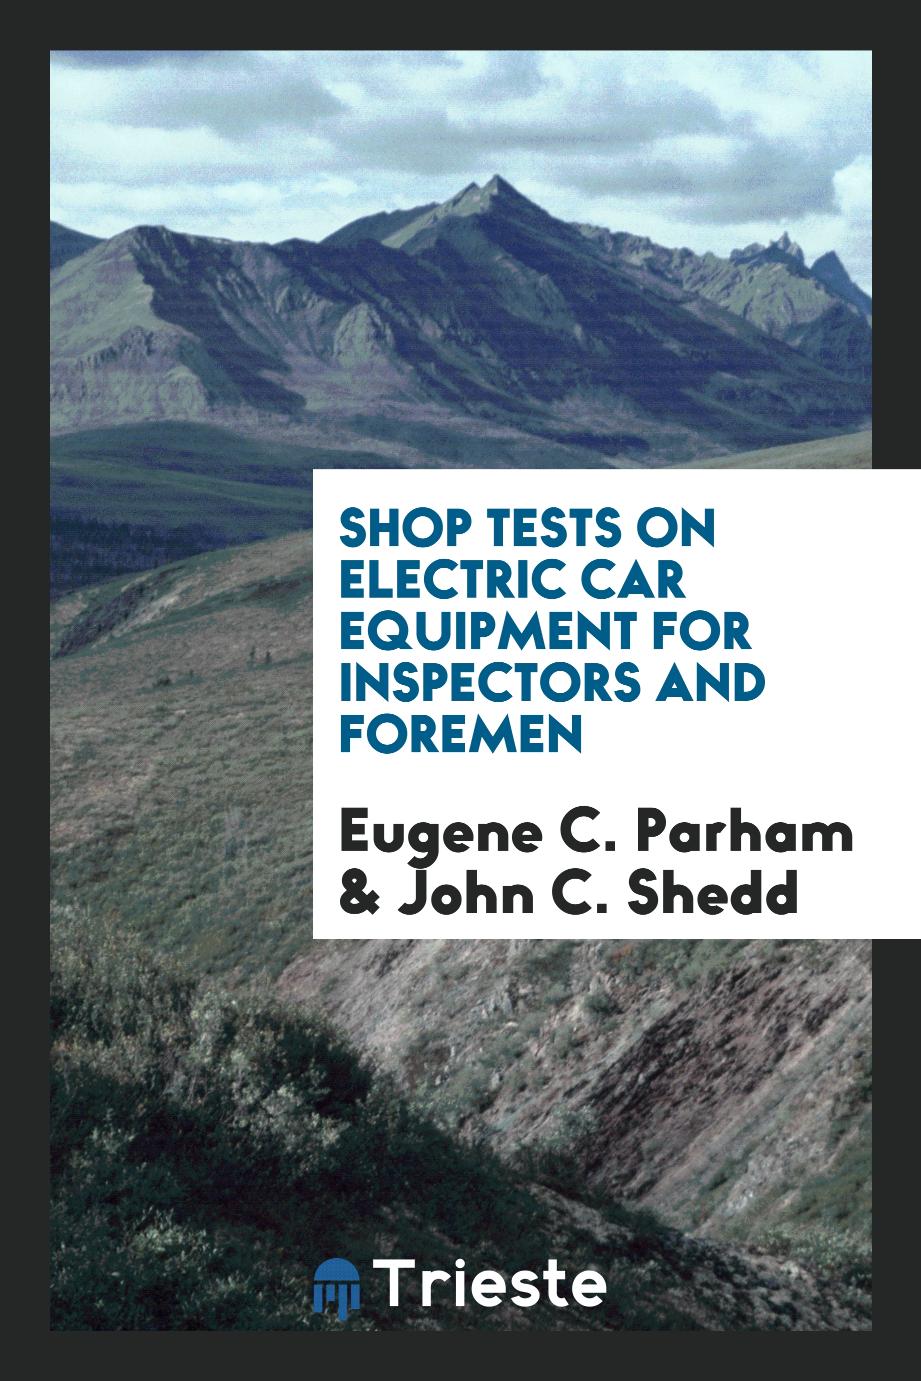 Shop Tests on Electric Car Equipment for Inspectors and Foremen